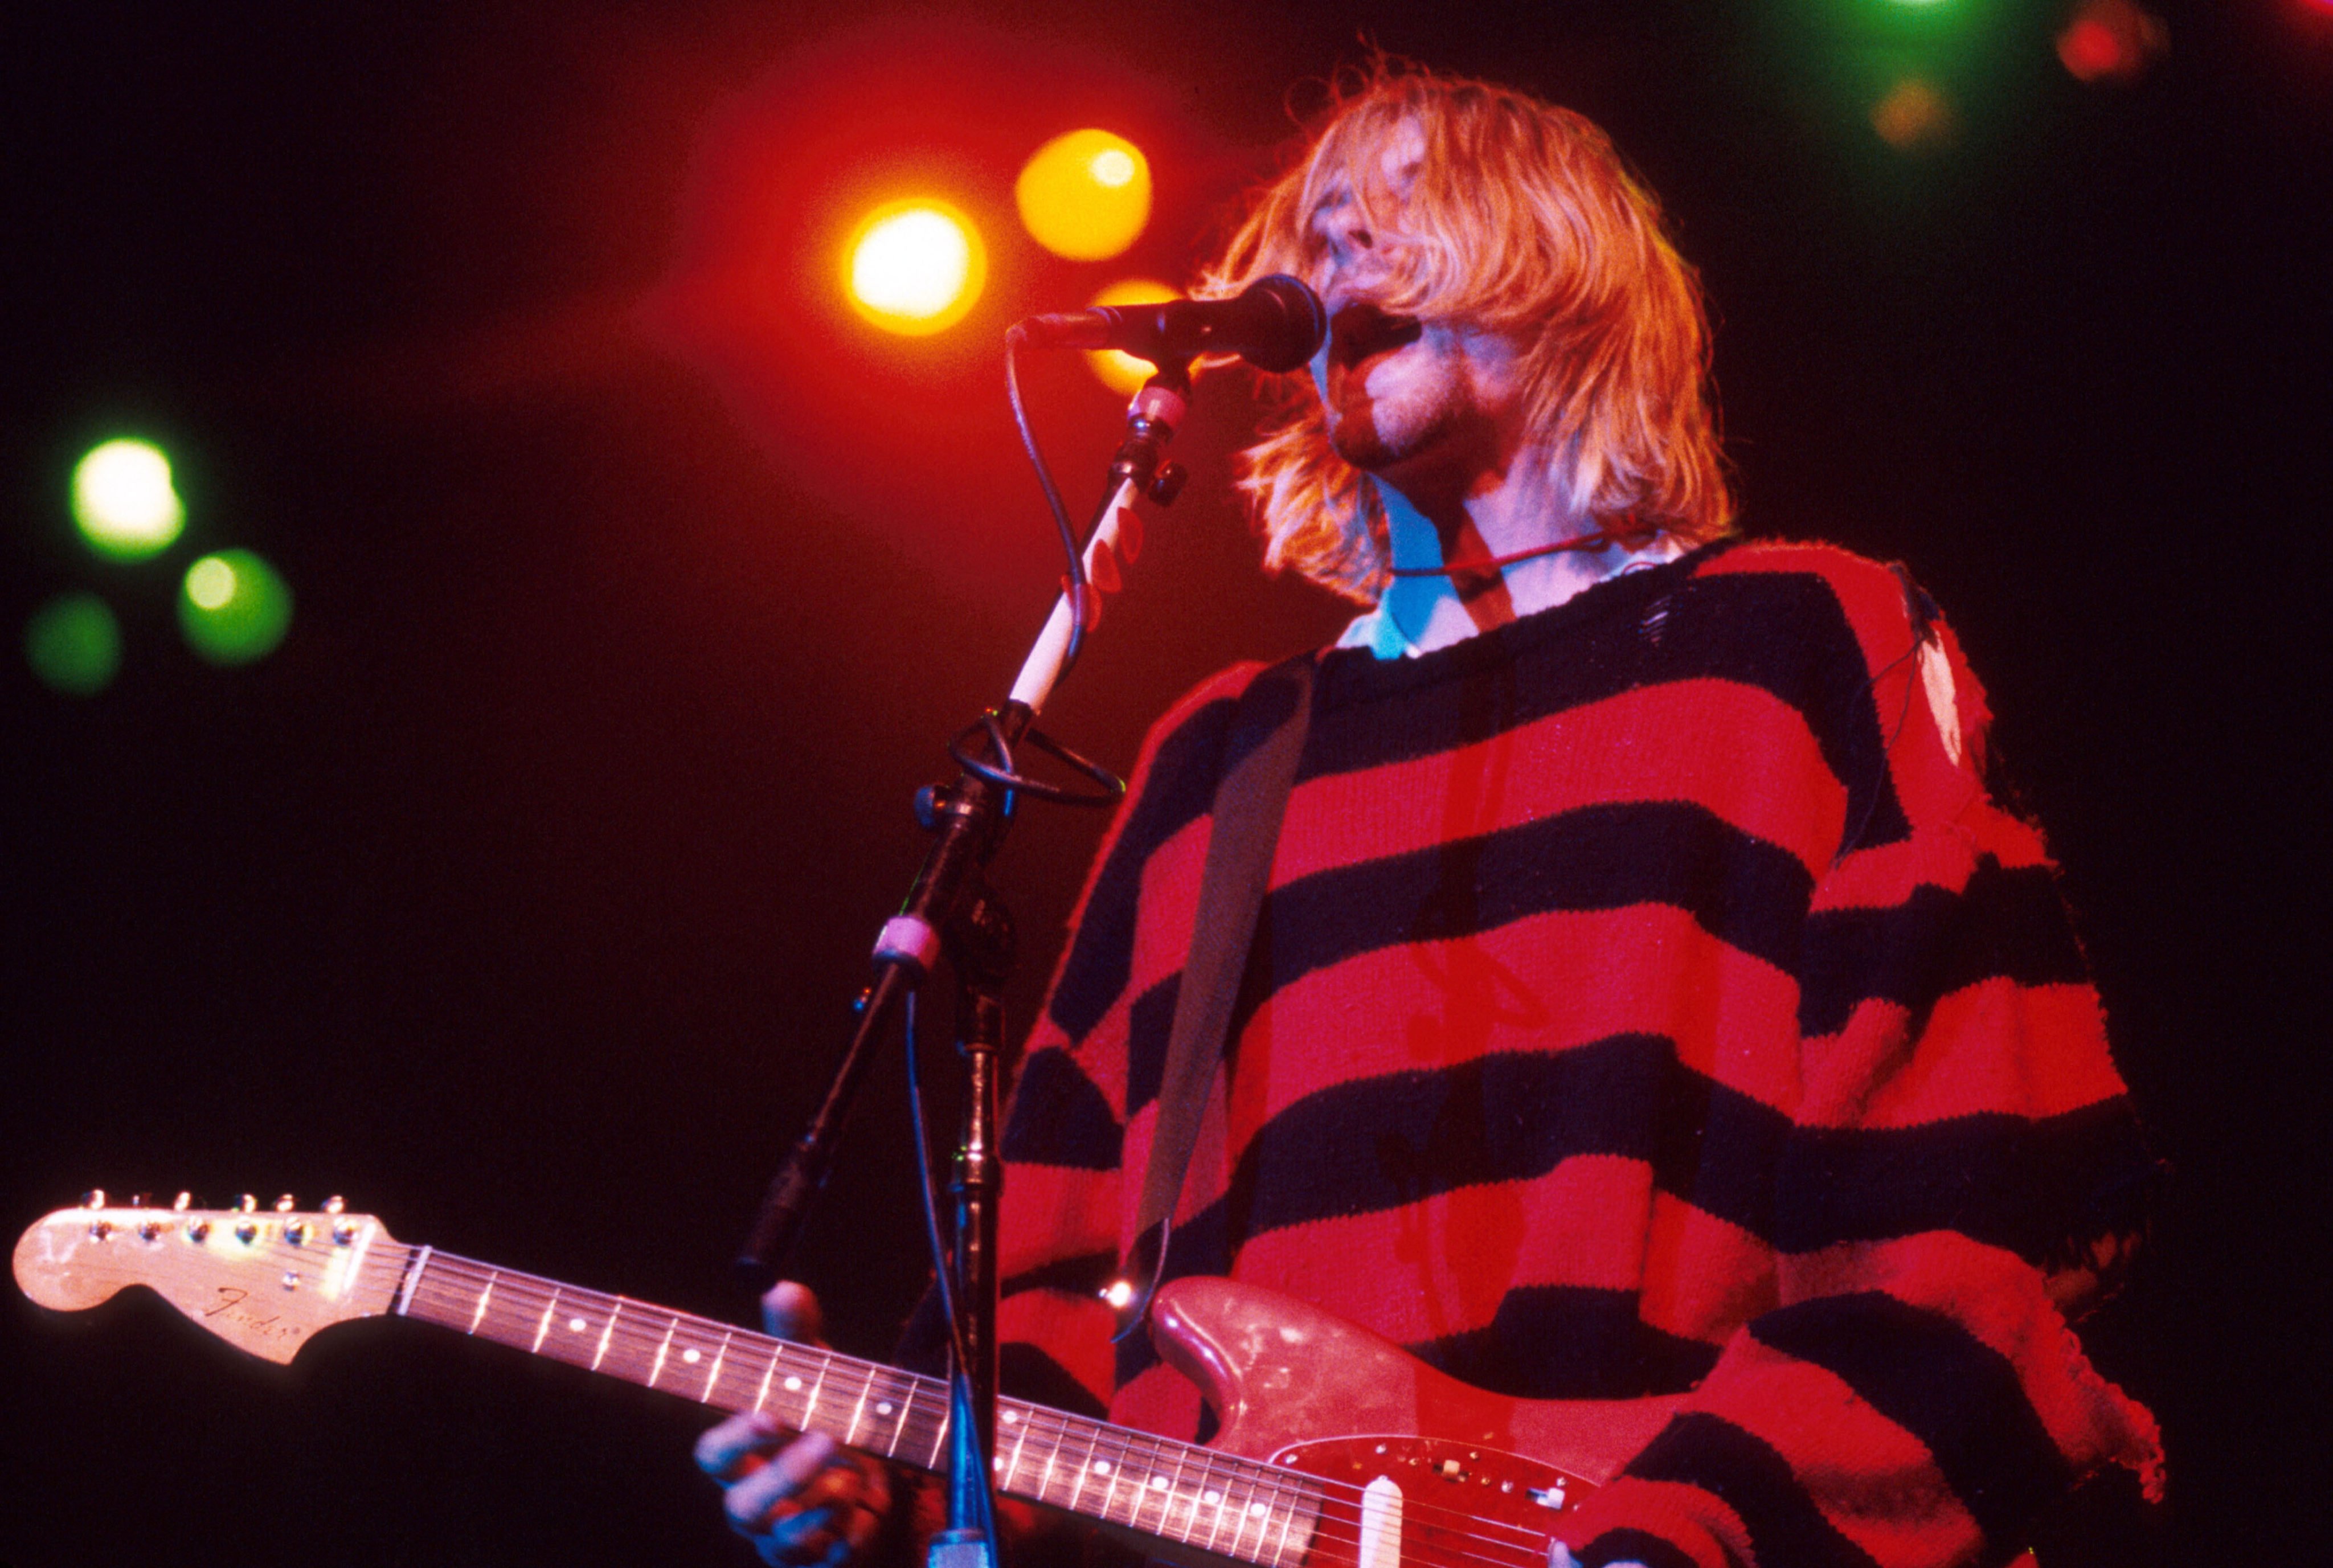 Nirvana frontman Kurt Cobain became a ’90s style icon with outfits from oversized cardigans to bug-eye shades, and his grunge fashion influence lives on 30 years after his death as much as his music. Photo: Getty Images